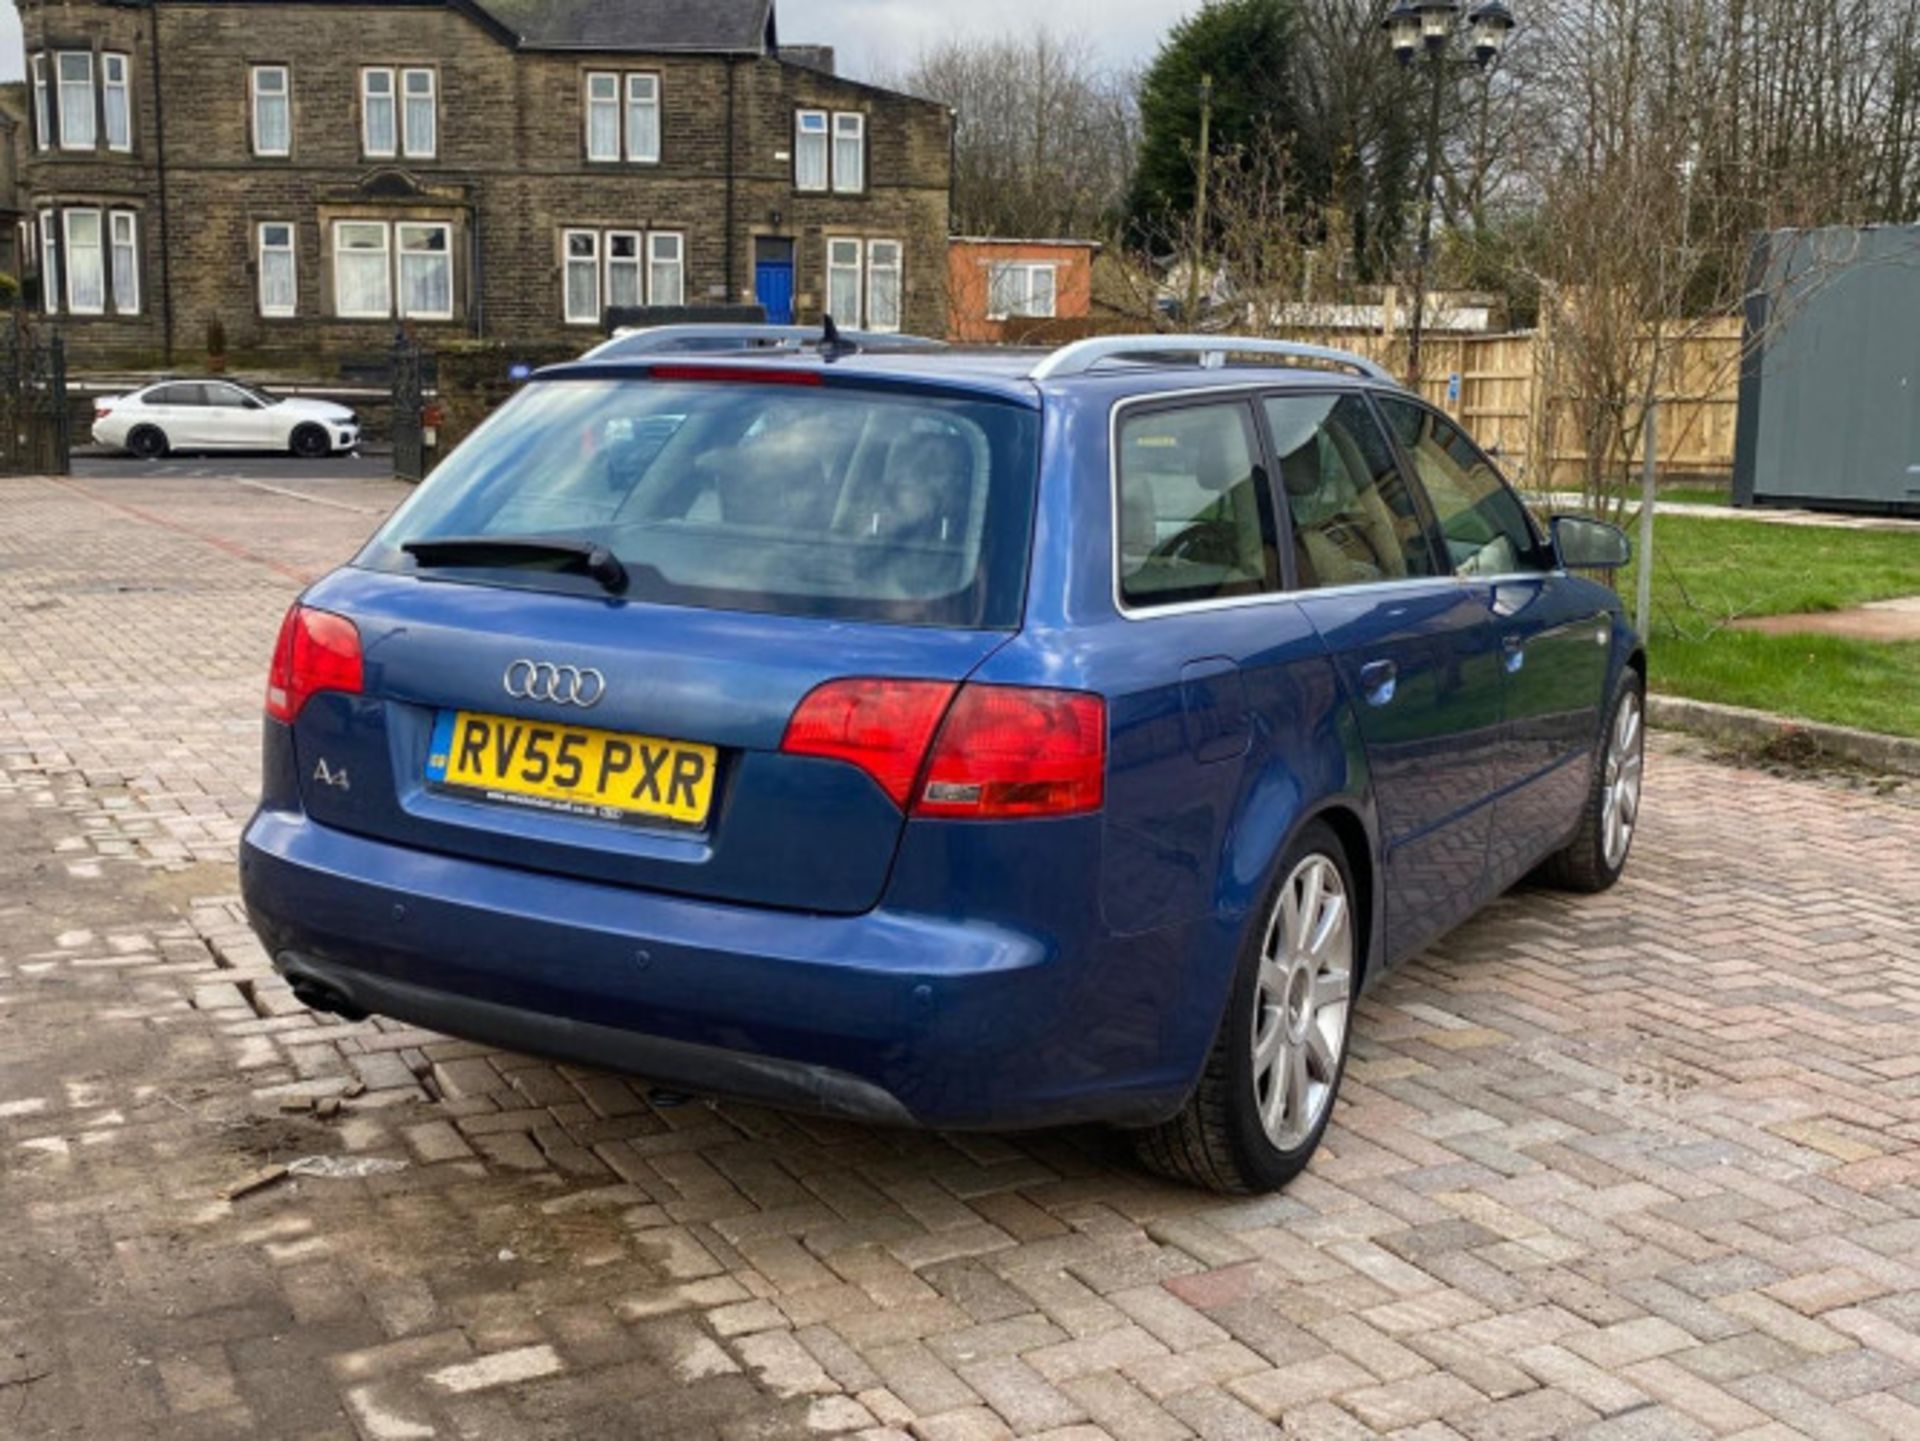 AUDI A4 AVANT 1.9 TDI SE 5DR ESTATE - RARE AND RELIABLE LUXURY WAGON >>--NO VAT ON HAMMER--<< - Image 92 of 97